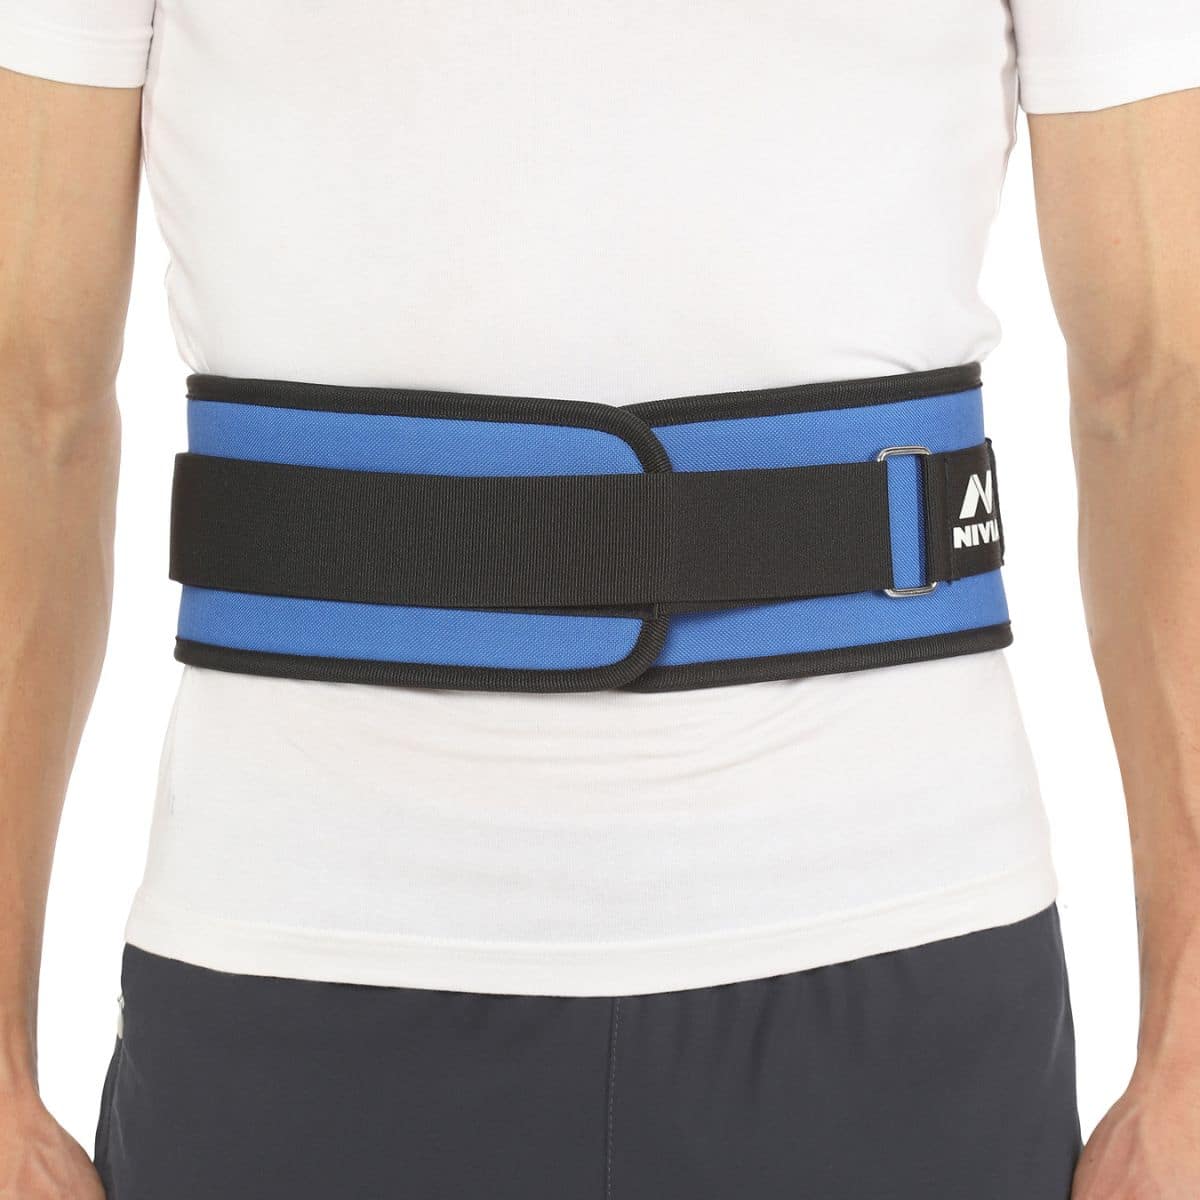 Nivia Weight Lifting Belt Gym Belt -30 Inches – Sports Wing